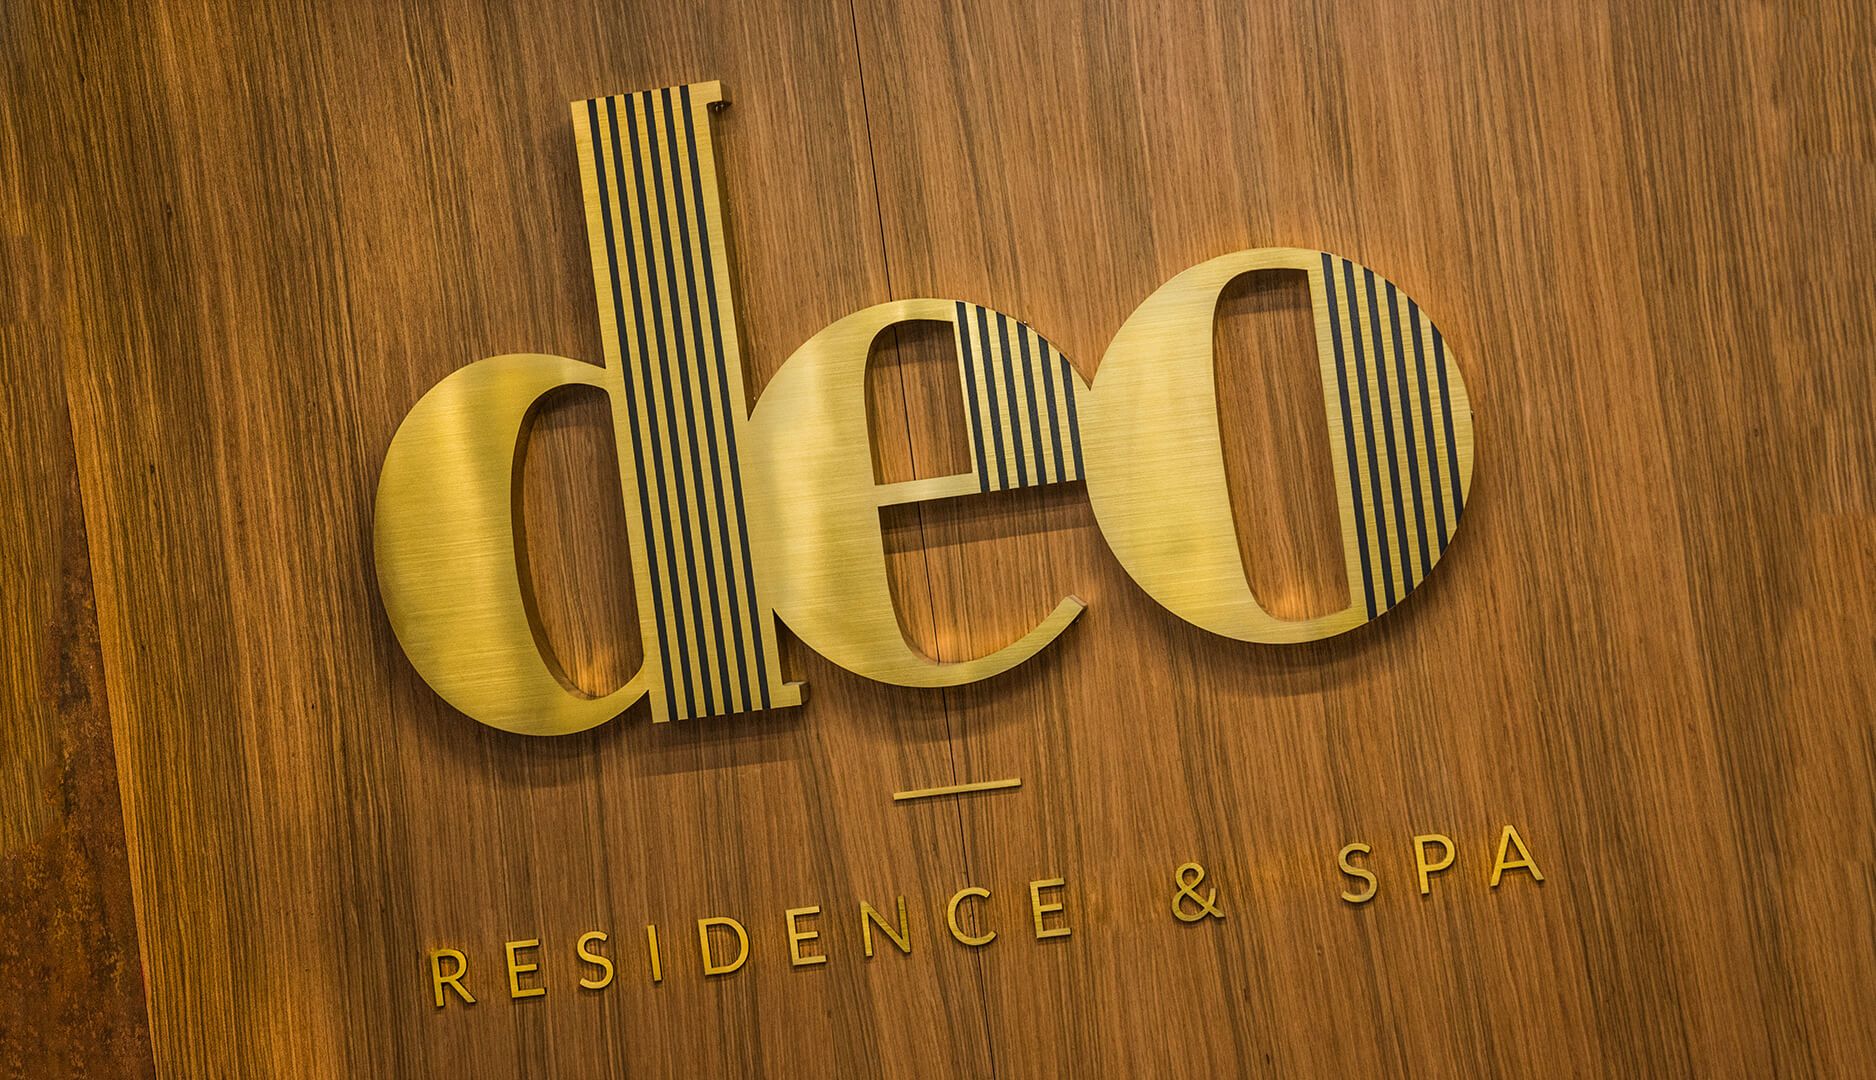 deo residenz deo hotel spa - deo-residence-lettering-from-solid-steel-brushed-lettering-over-the-entry-to-the-office-building-lettering-at-height-mounted-to-the-wall-lettering-on-sheets-lettering-on-decks-logo-firm-gdansk